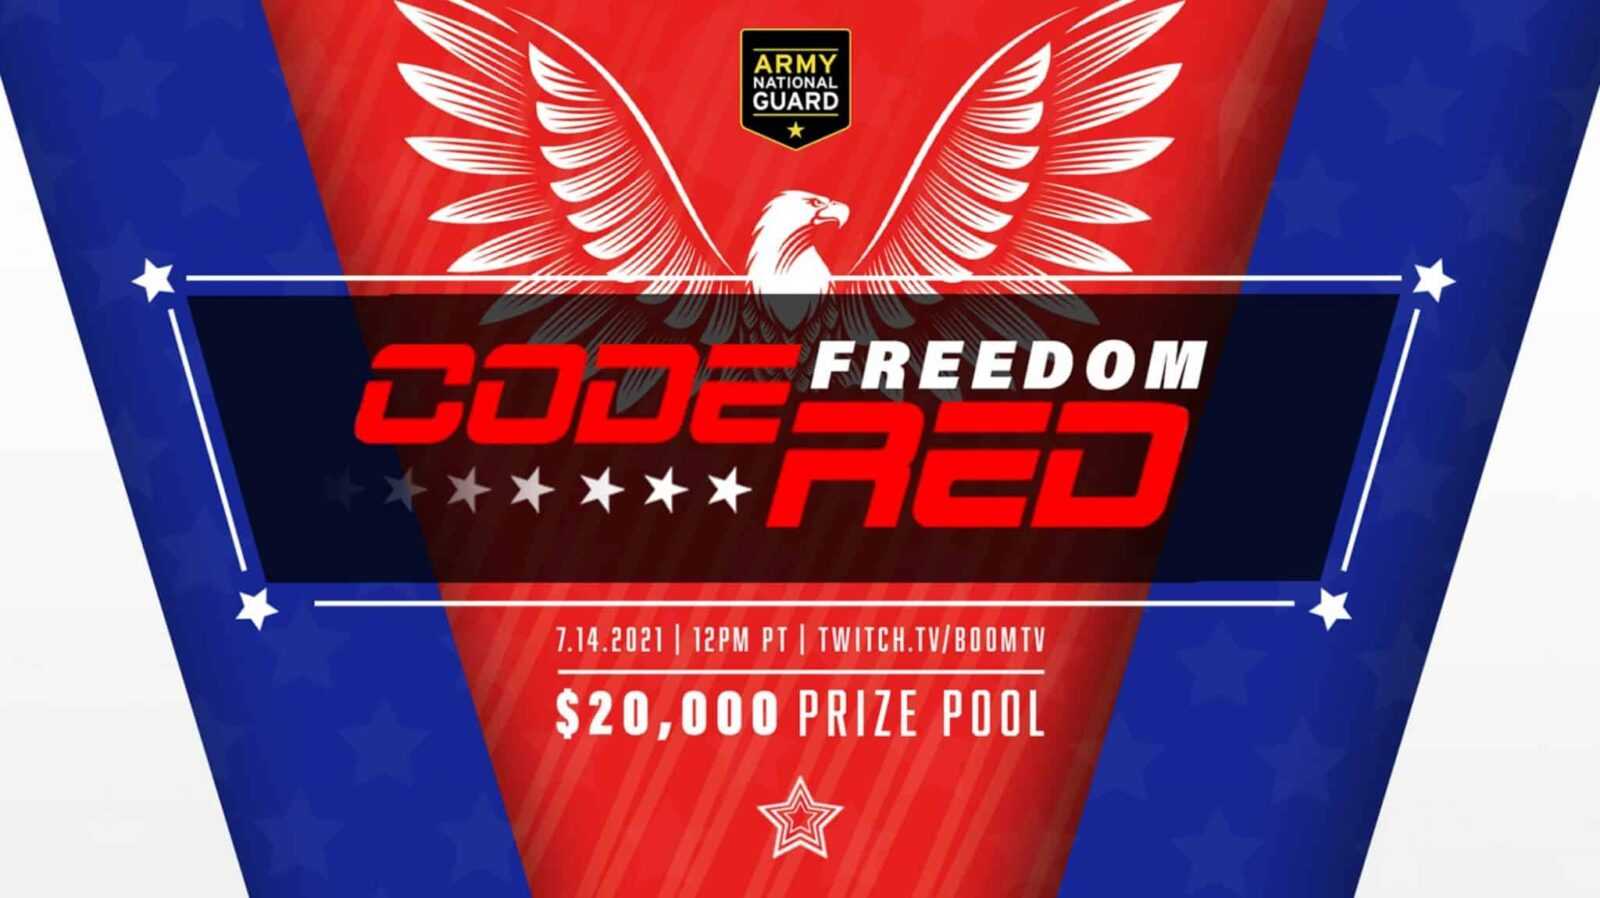 Code Red Freedom Warzone tournament